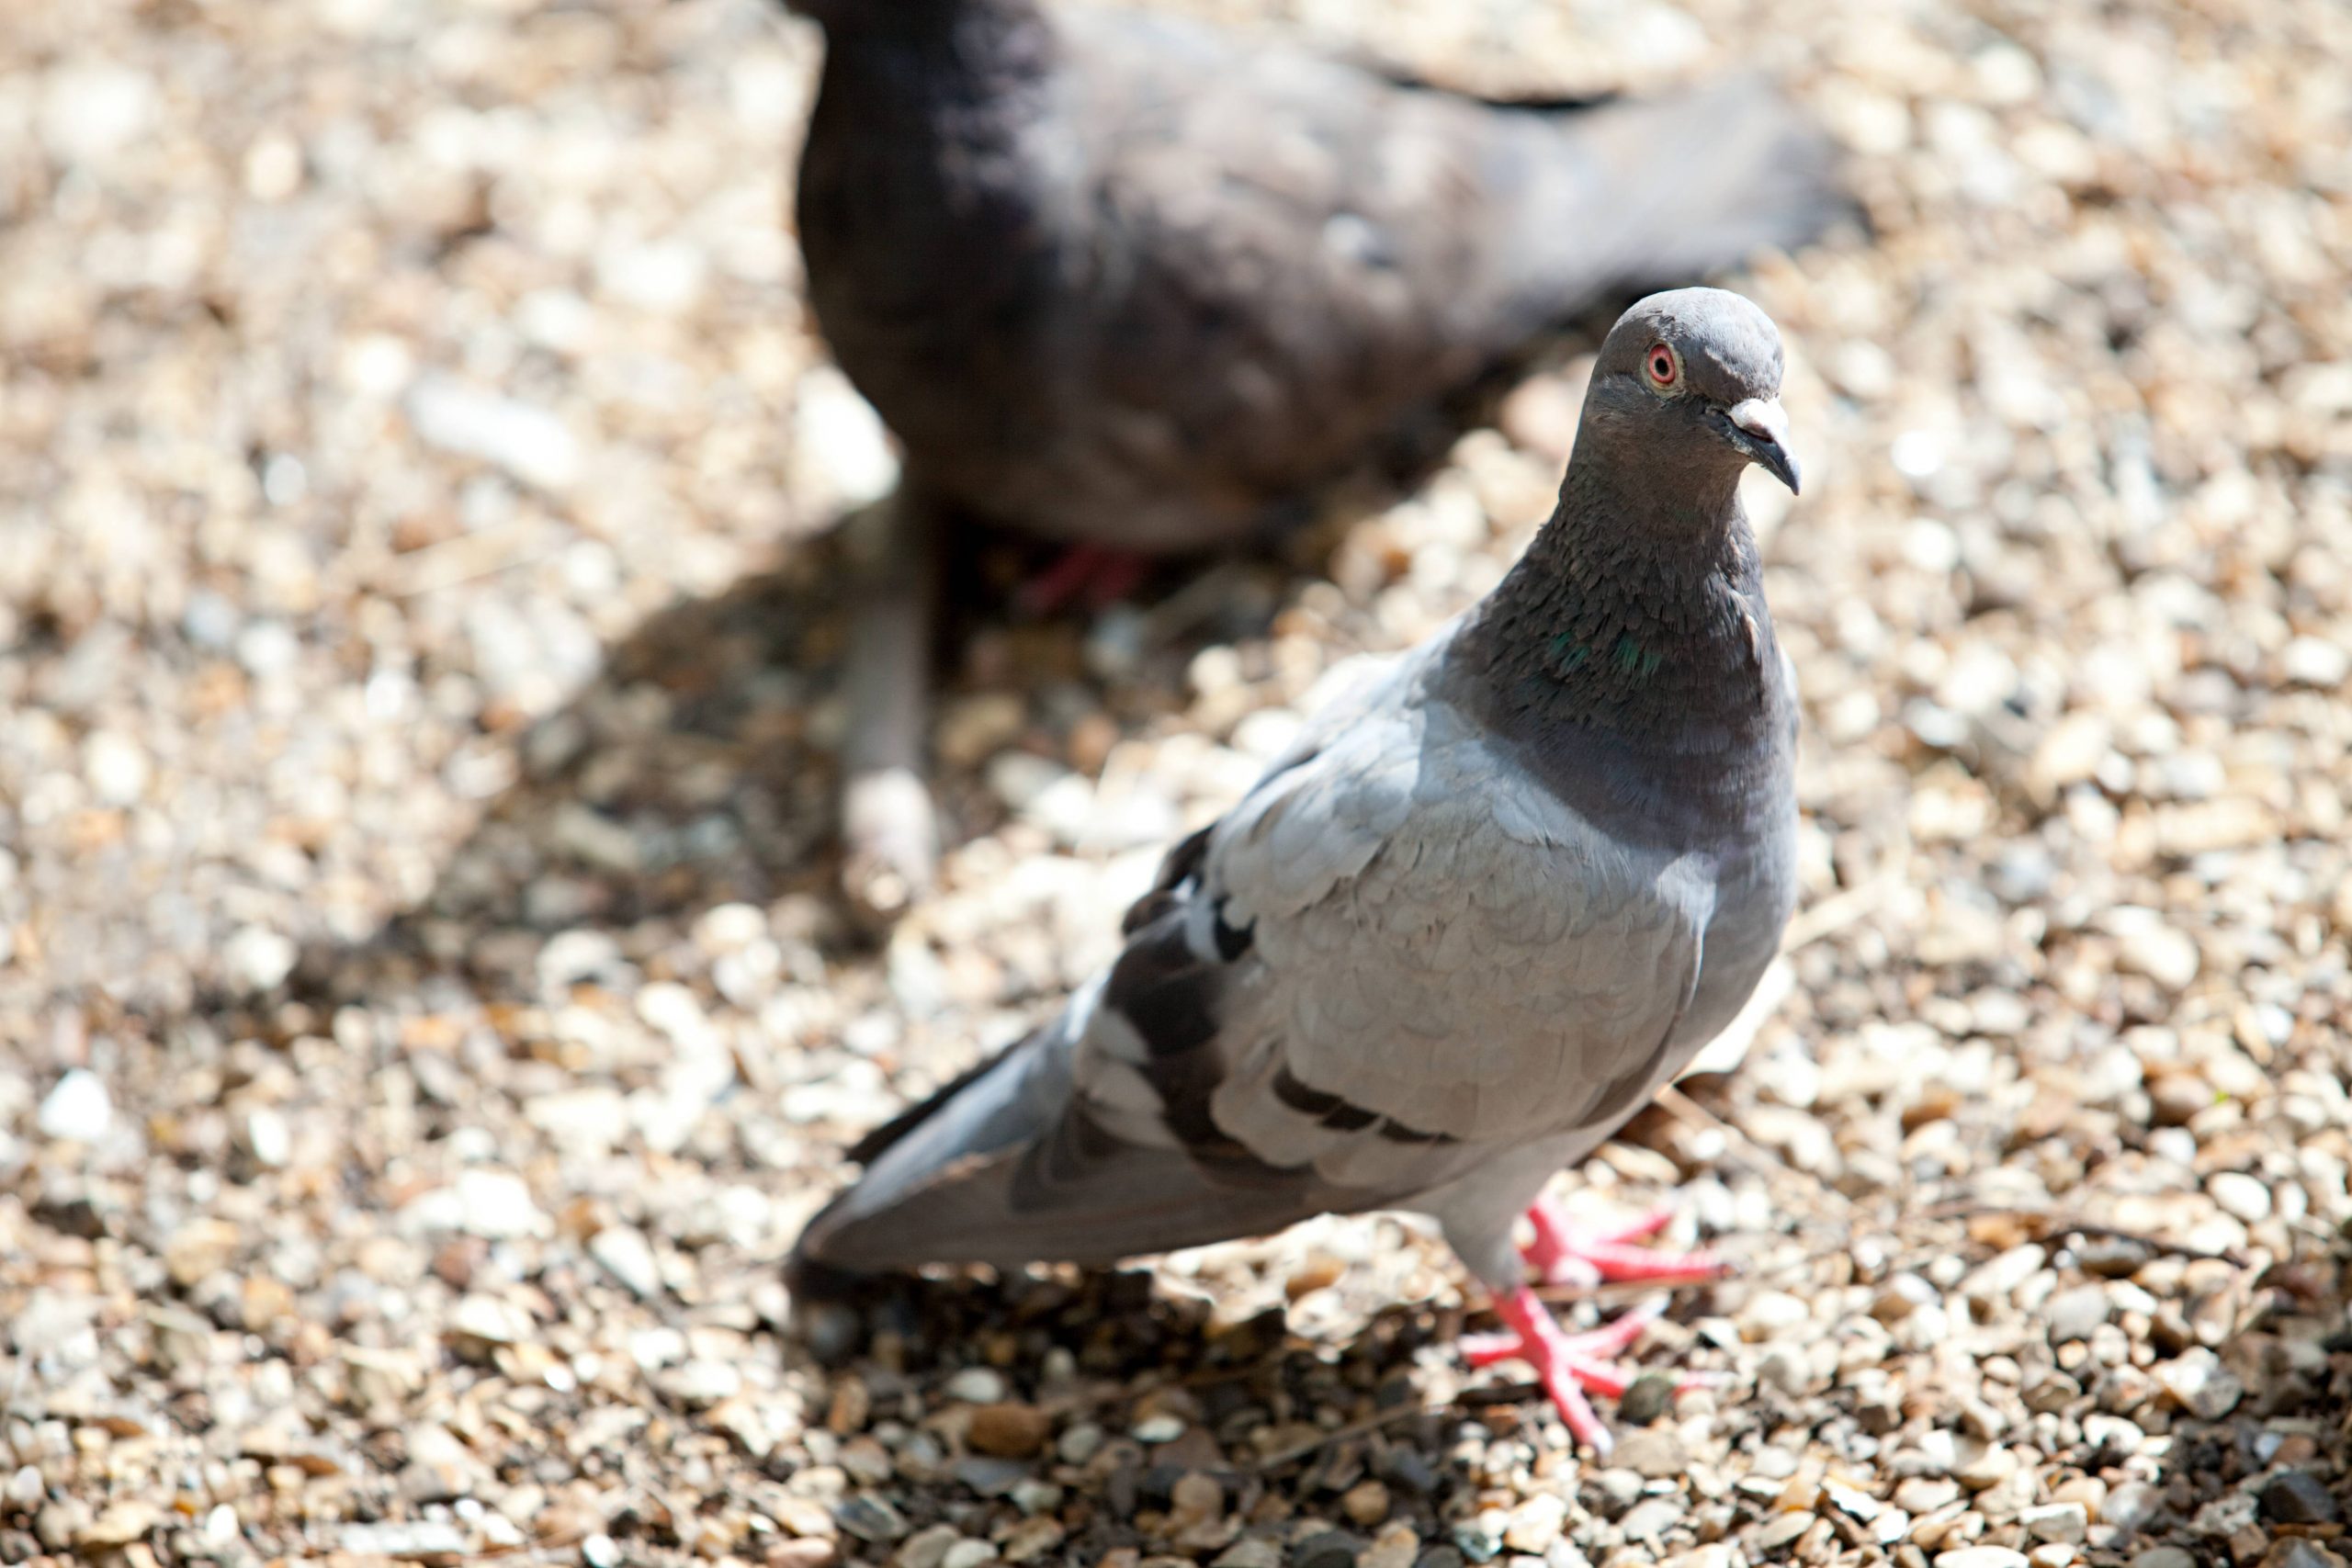 Child thieves lead wave of racing pigeon robberies in Alicante area of Spain